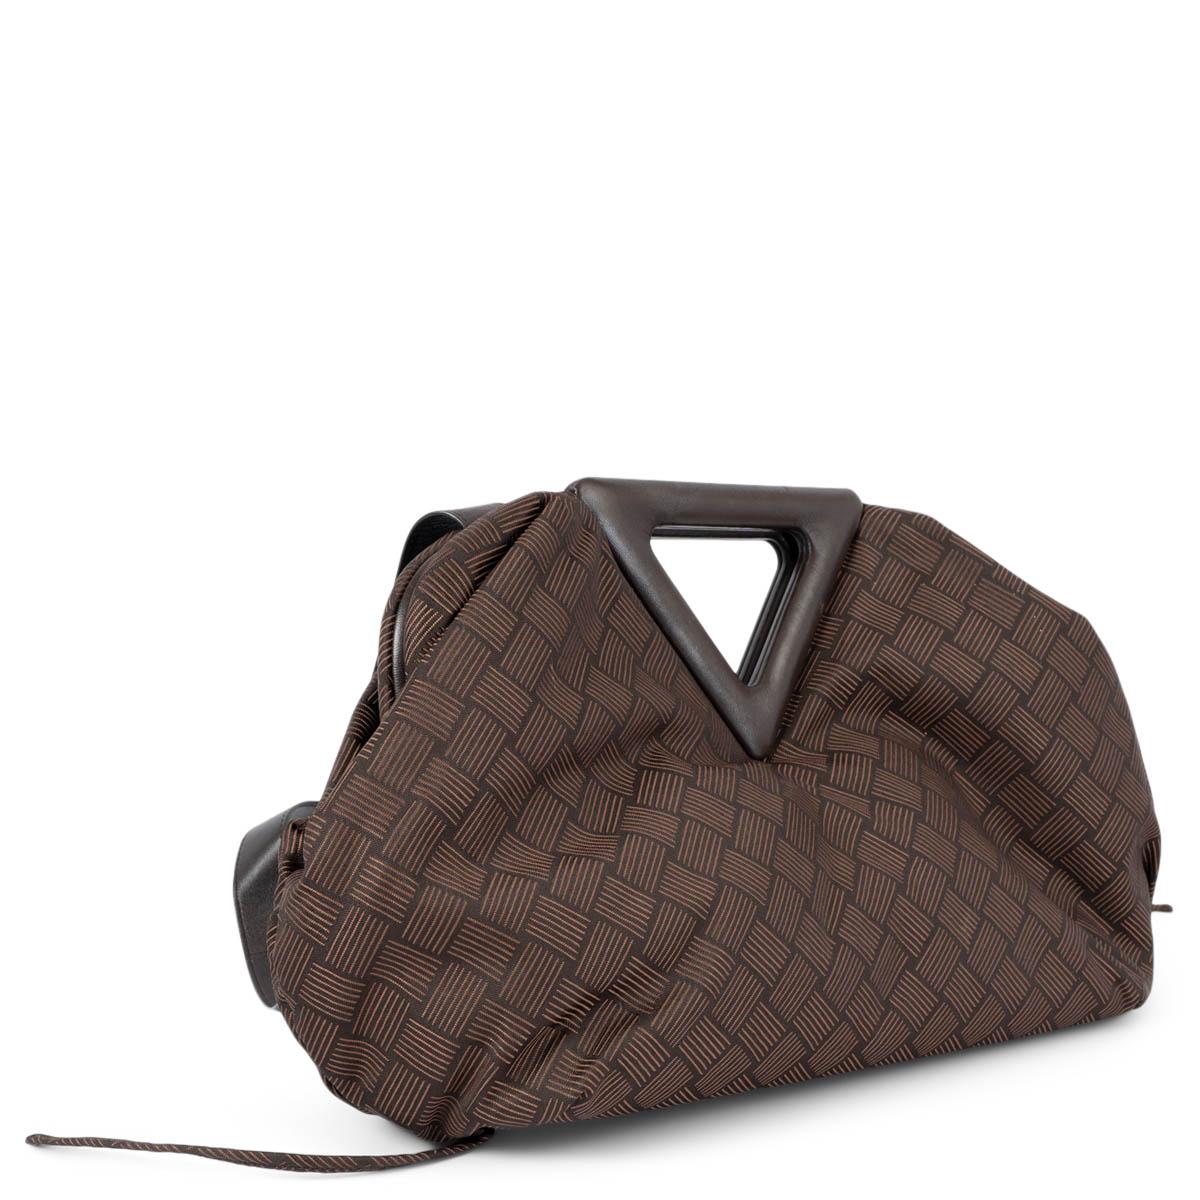 100% authentic Bottega Veneta Large Point bag in Fondant (dark brown) Intrecciato jacquard nylon. Features double triangle handle in leather, removable and adjustable shoulder strap, silver-tone hardware and two tassels on the bottom. Closes with a